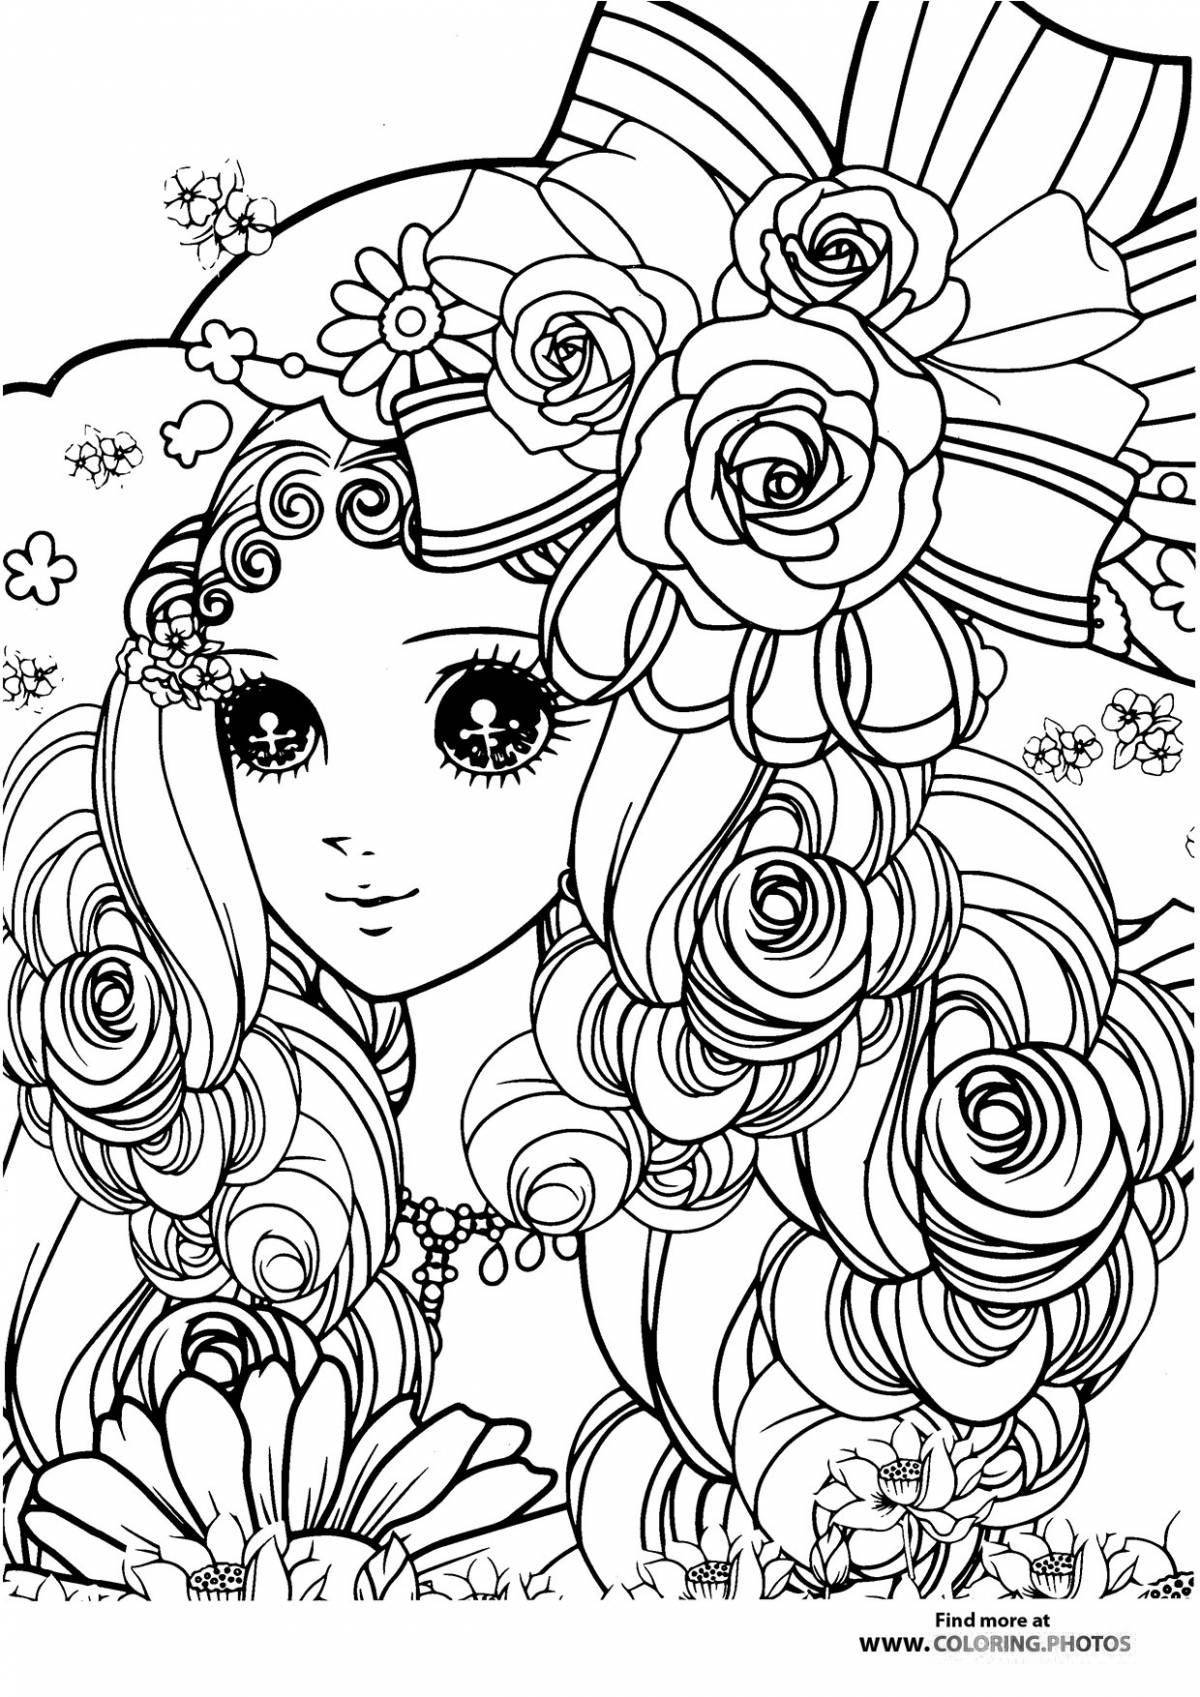 Colour coloring for girls 14 years old, modern